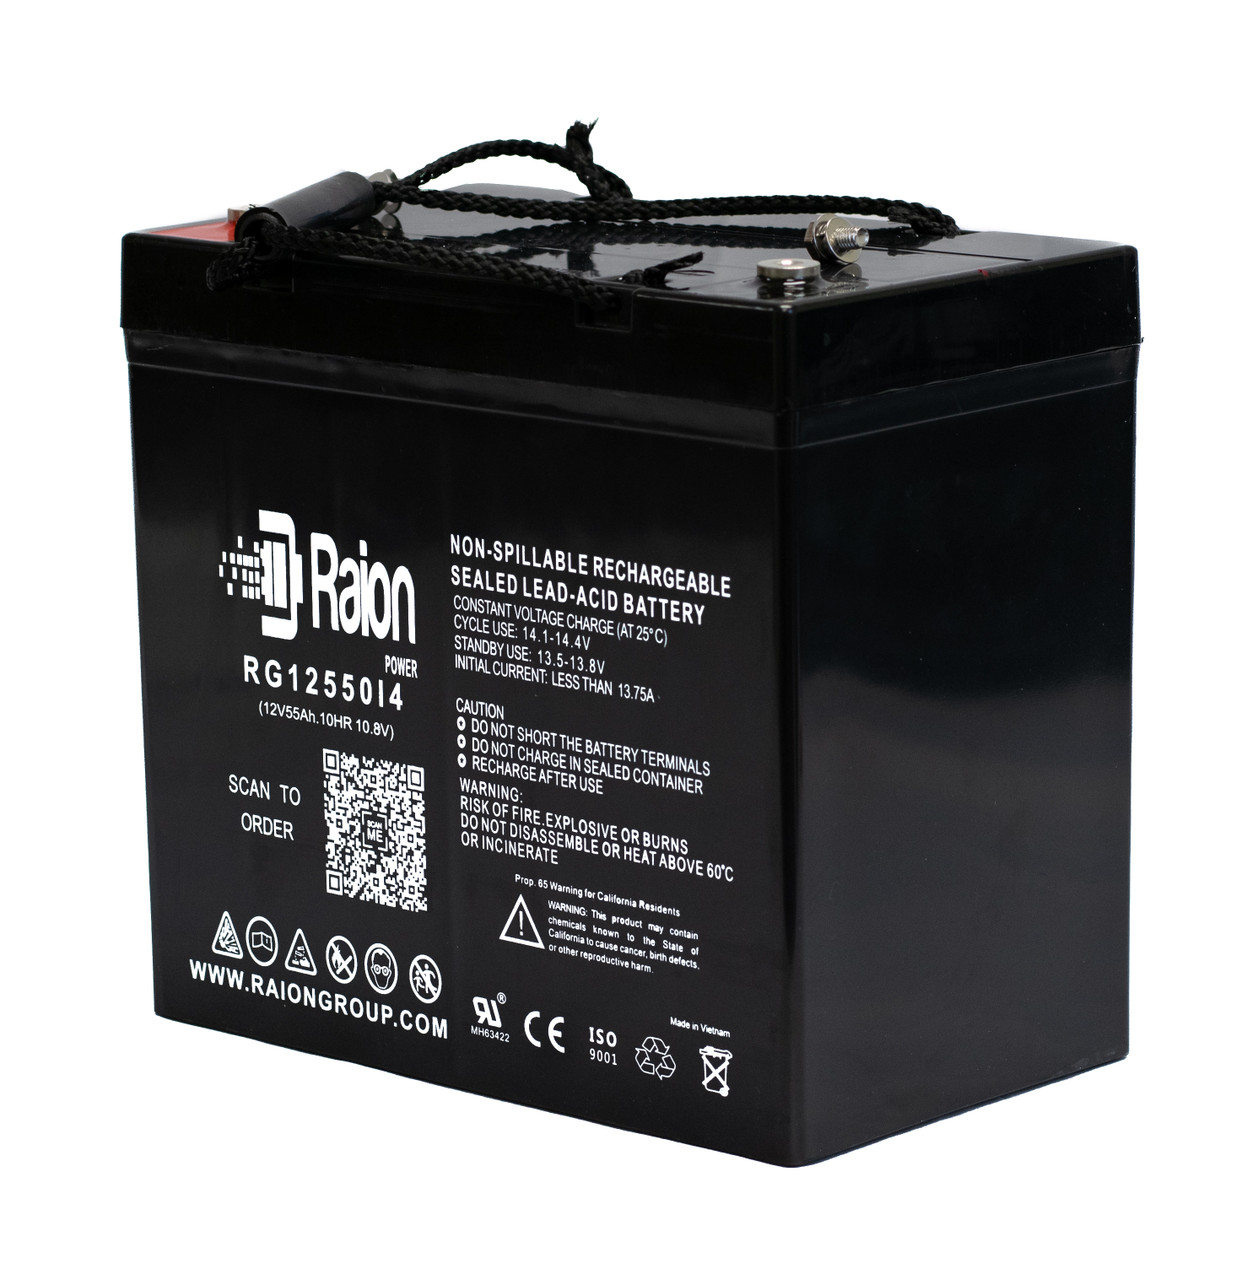 Raion Power 12V 55Ah 22NF Mobility Scooter Battery Replacement for Pace Saver Scout Midi-Drive (RF4)